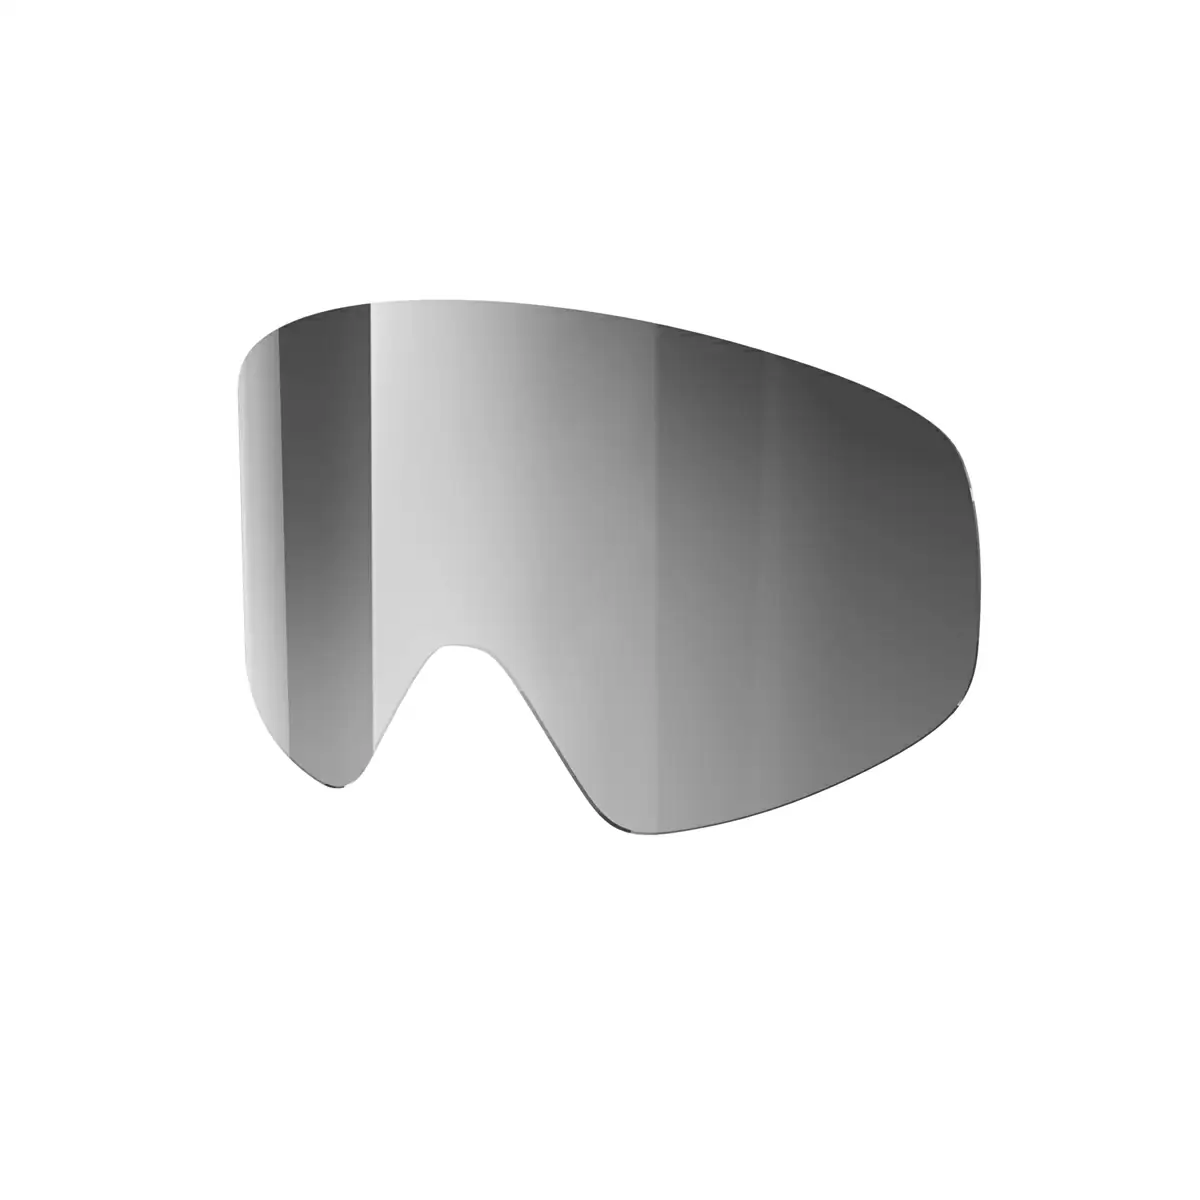 Replacement grey lens for Ora goggles - image